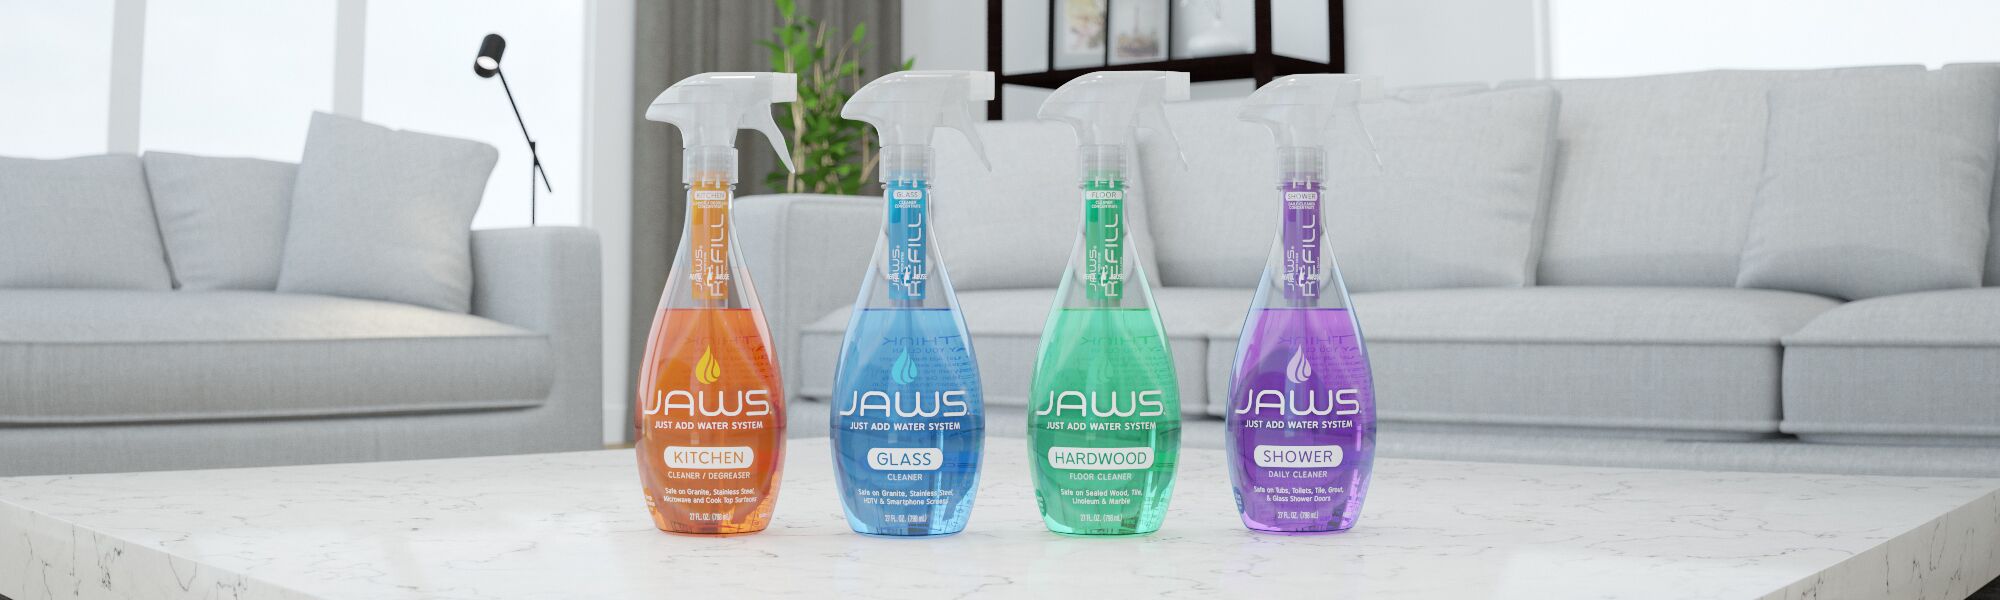 JAWS Eco-Friendly Cleaning Products